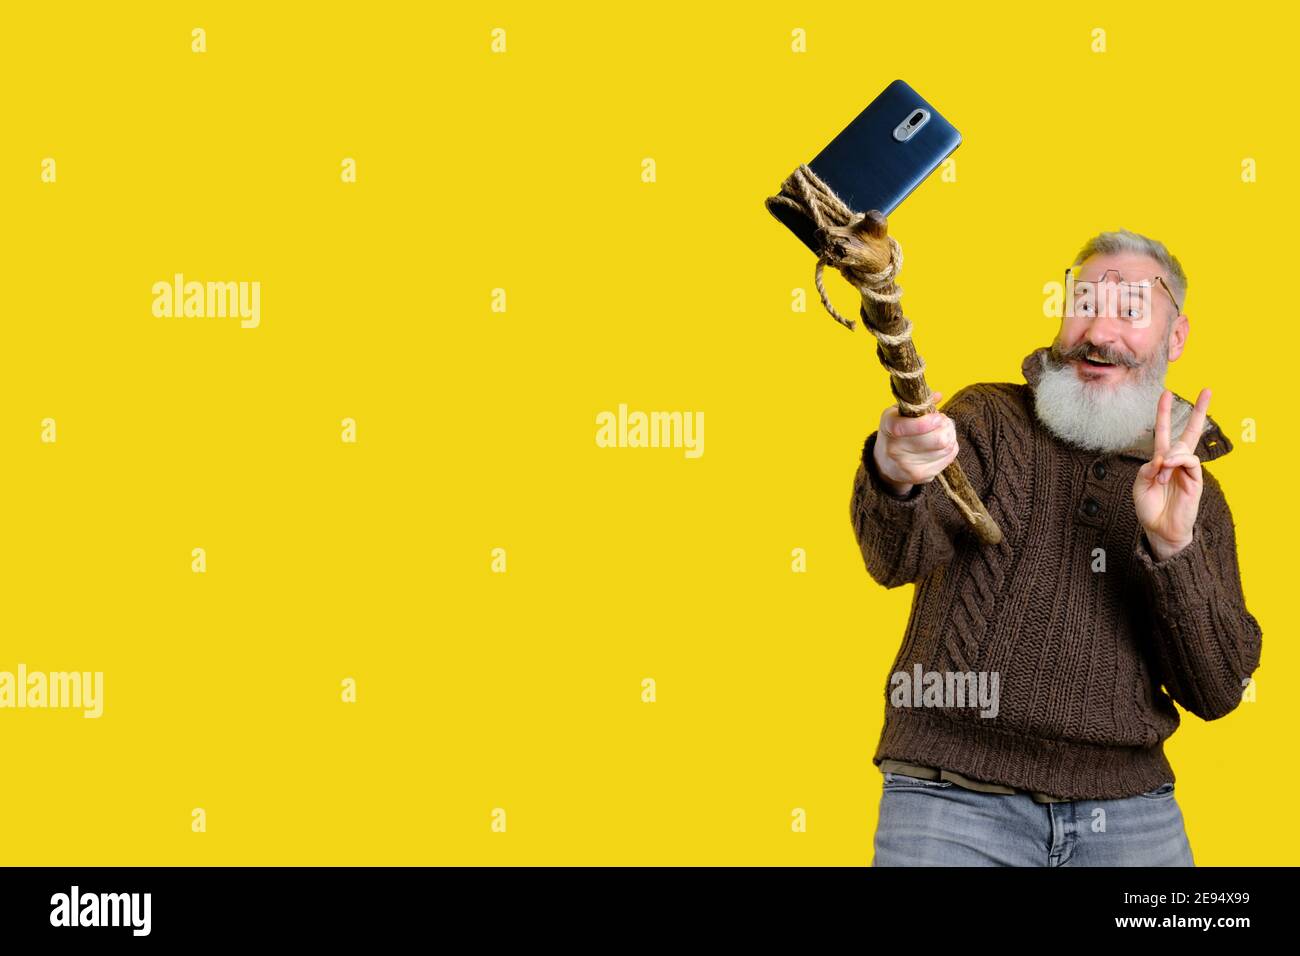 Studio portrait of mature bearded man taking selfie with wooden stick, funny selfie making concept, yellow background Stock Photo